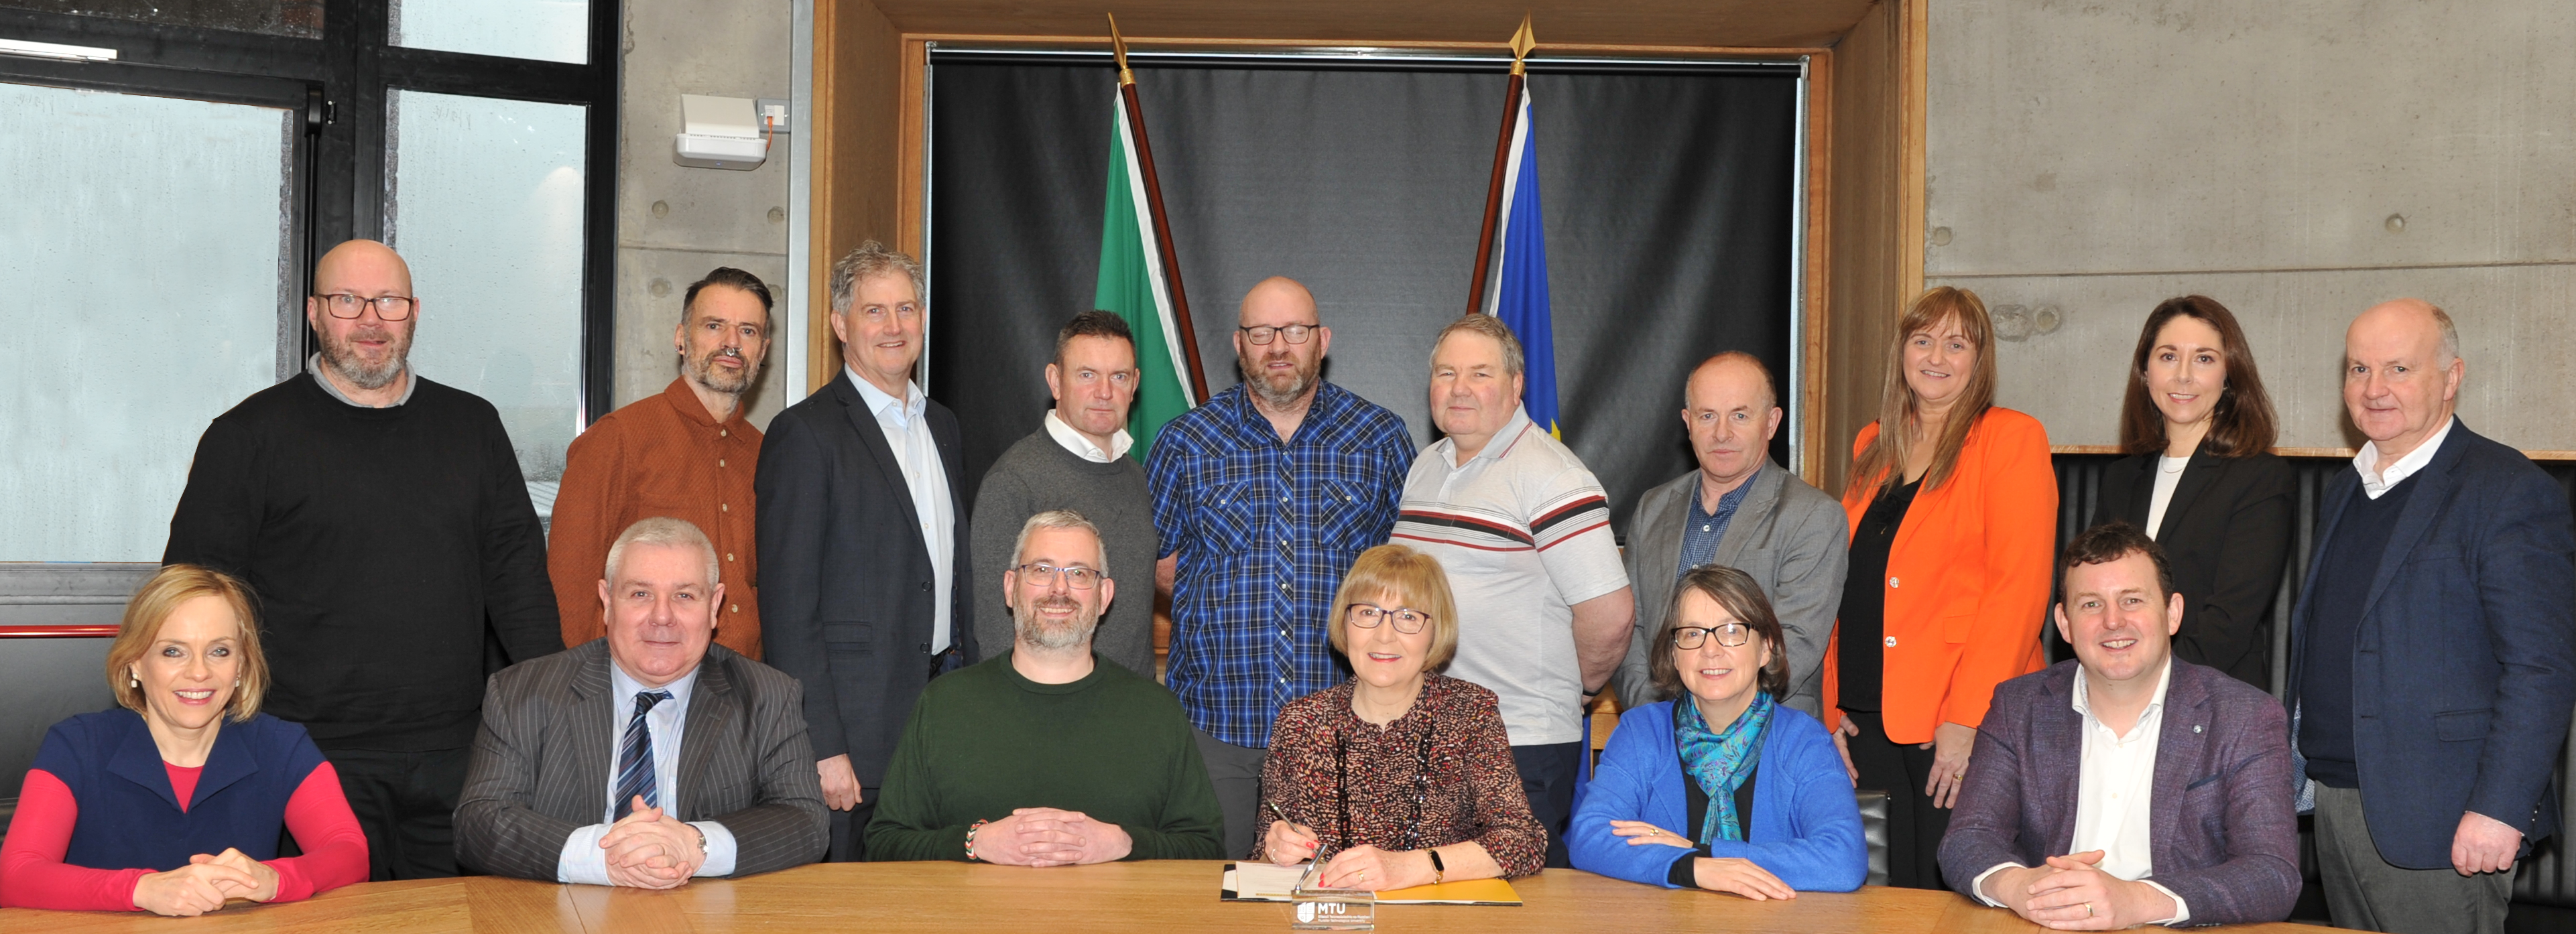 MTU colleagues sat at a table during the Technician Commitment signing